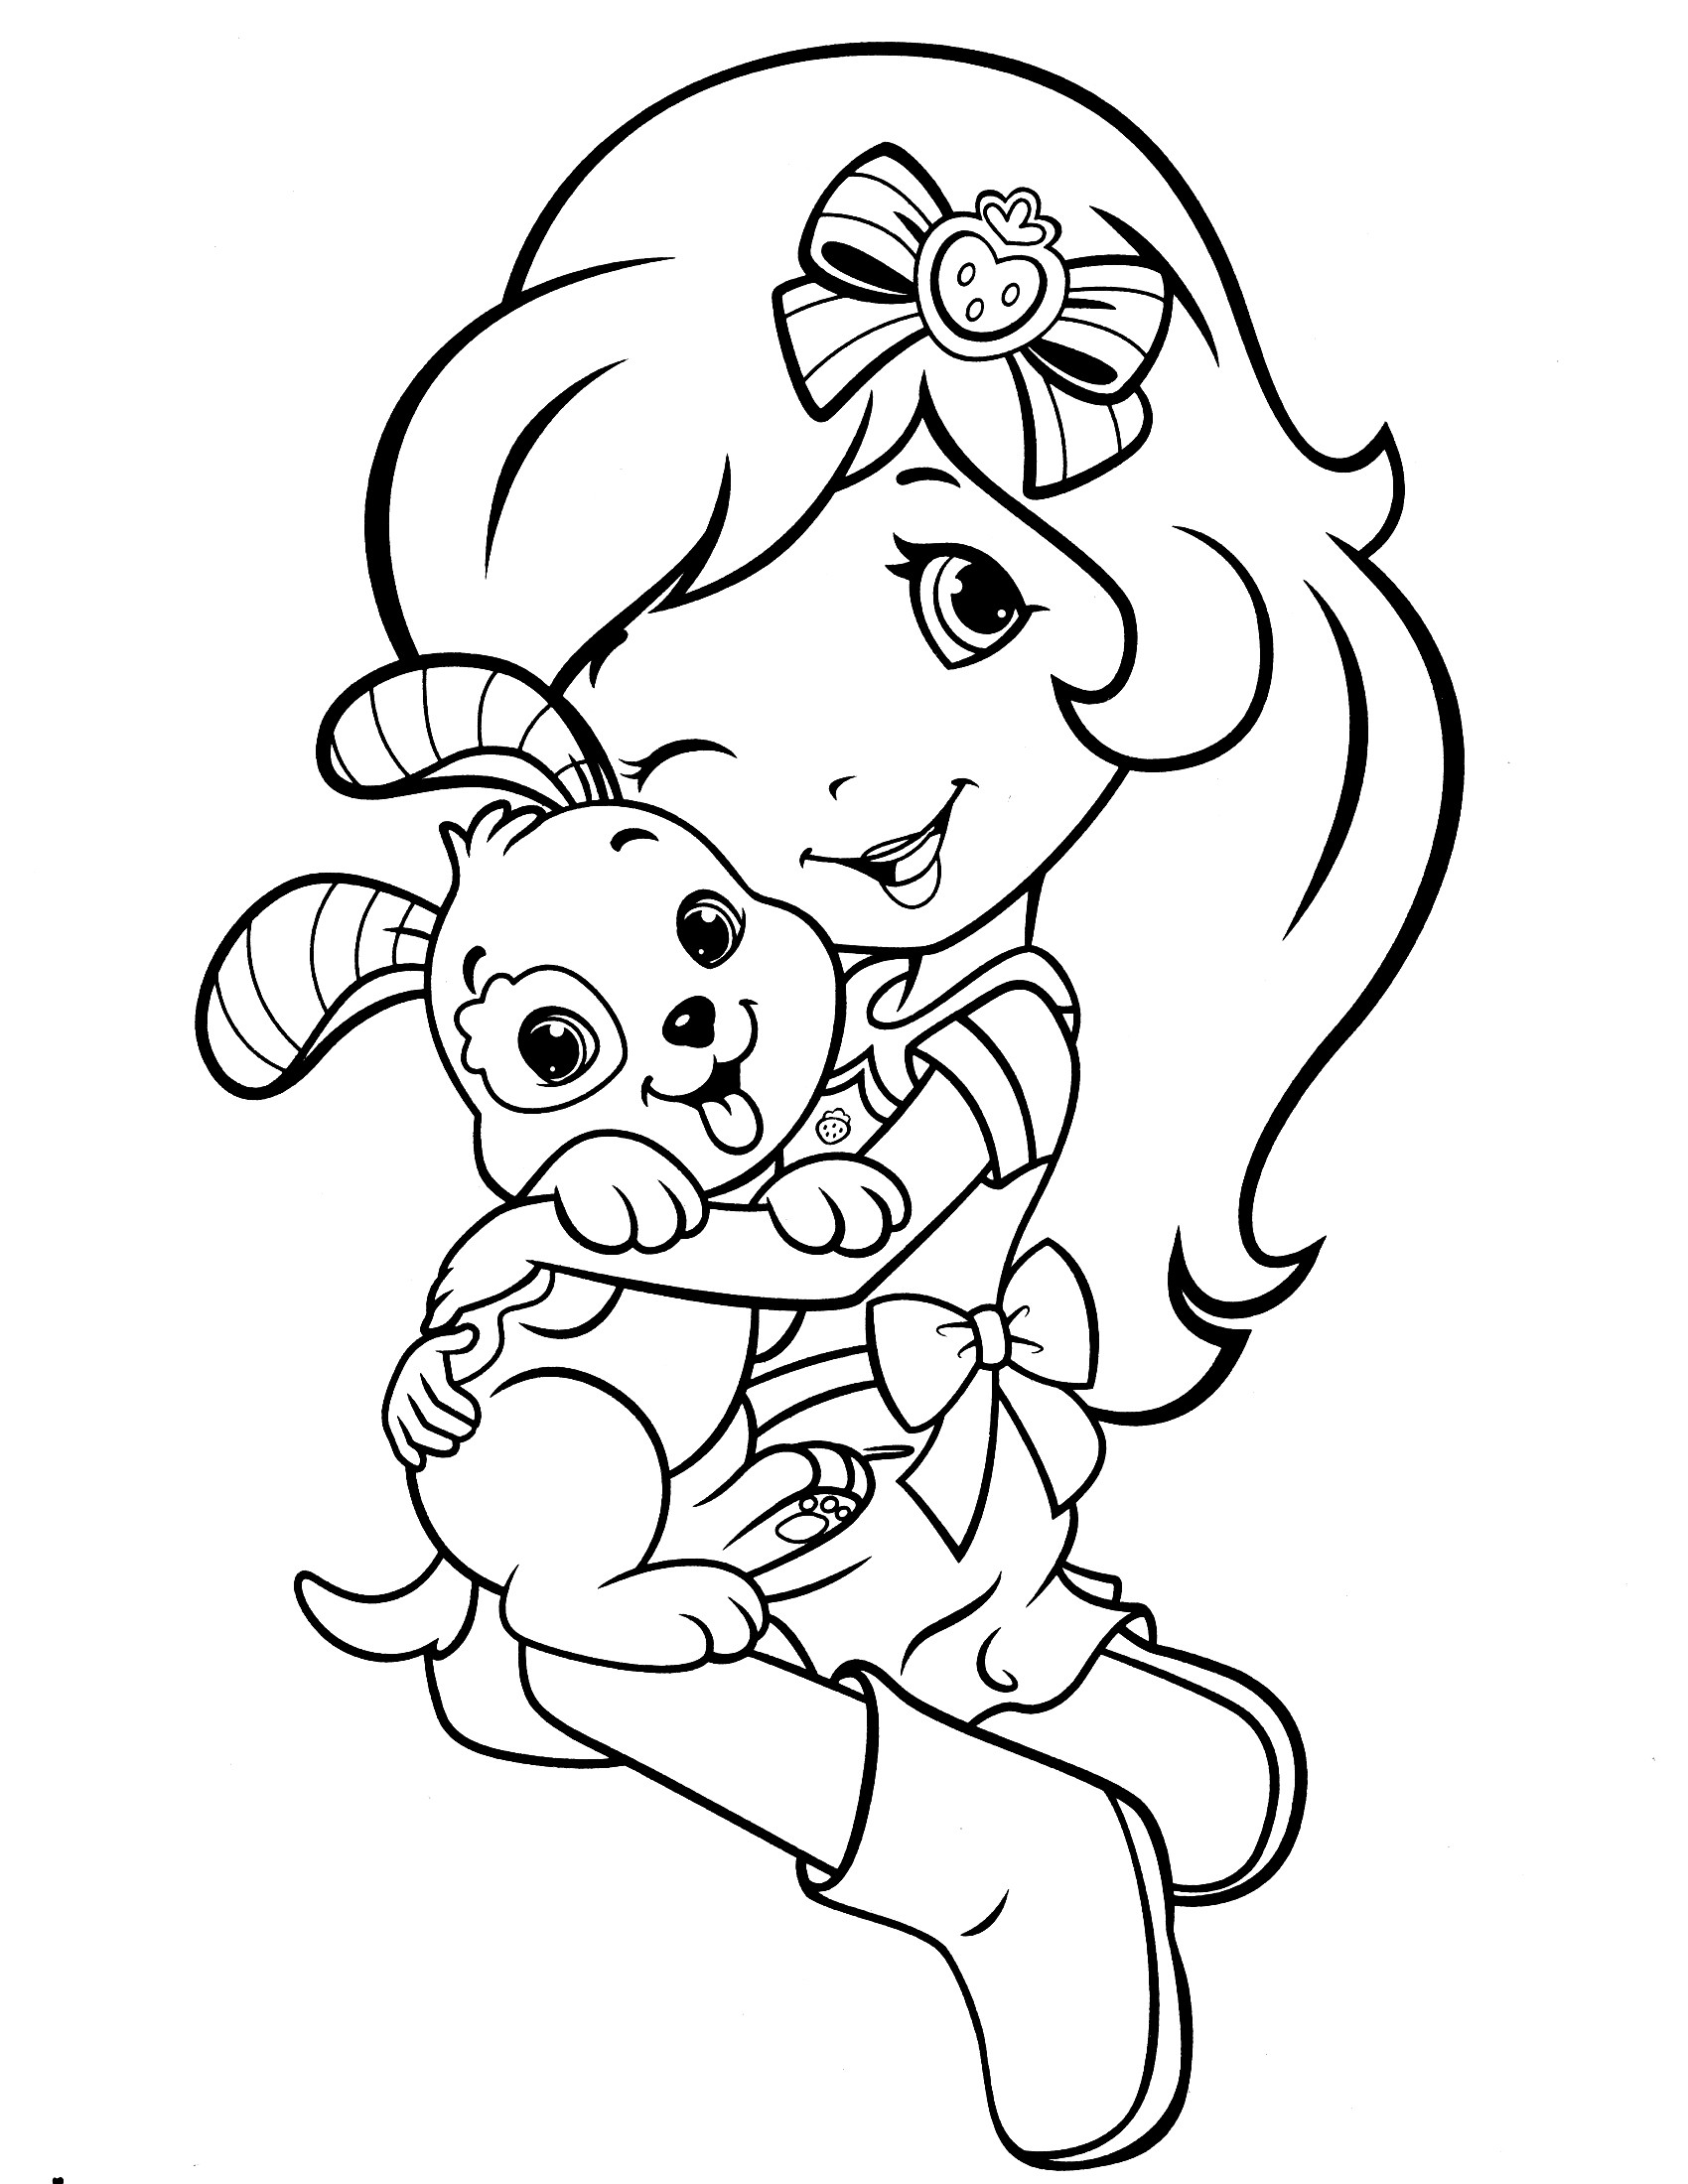 Cool Coloring Pages For Kids
 Strawberry Shortcake Coloring Pages Cool coloring pages